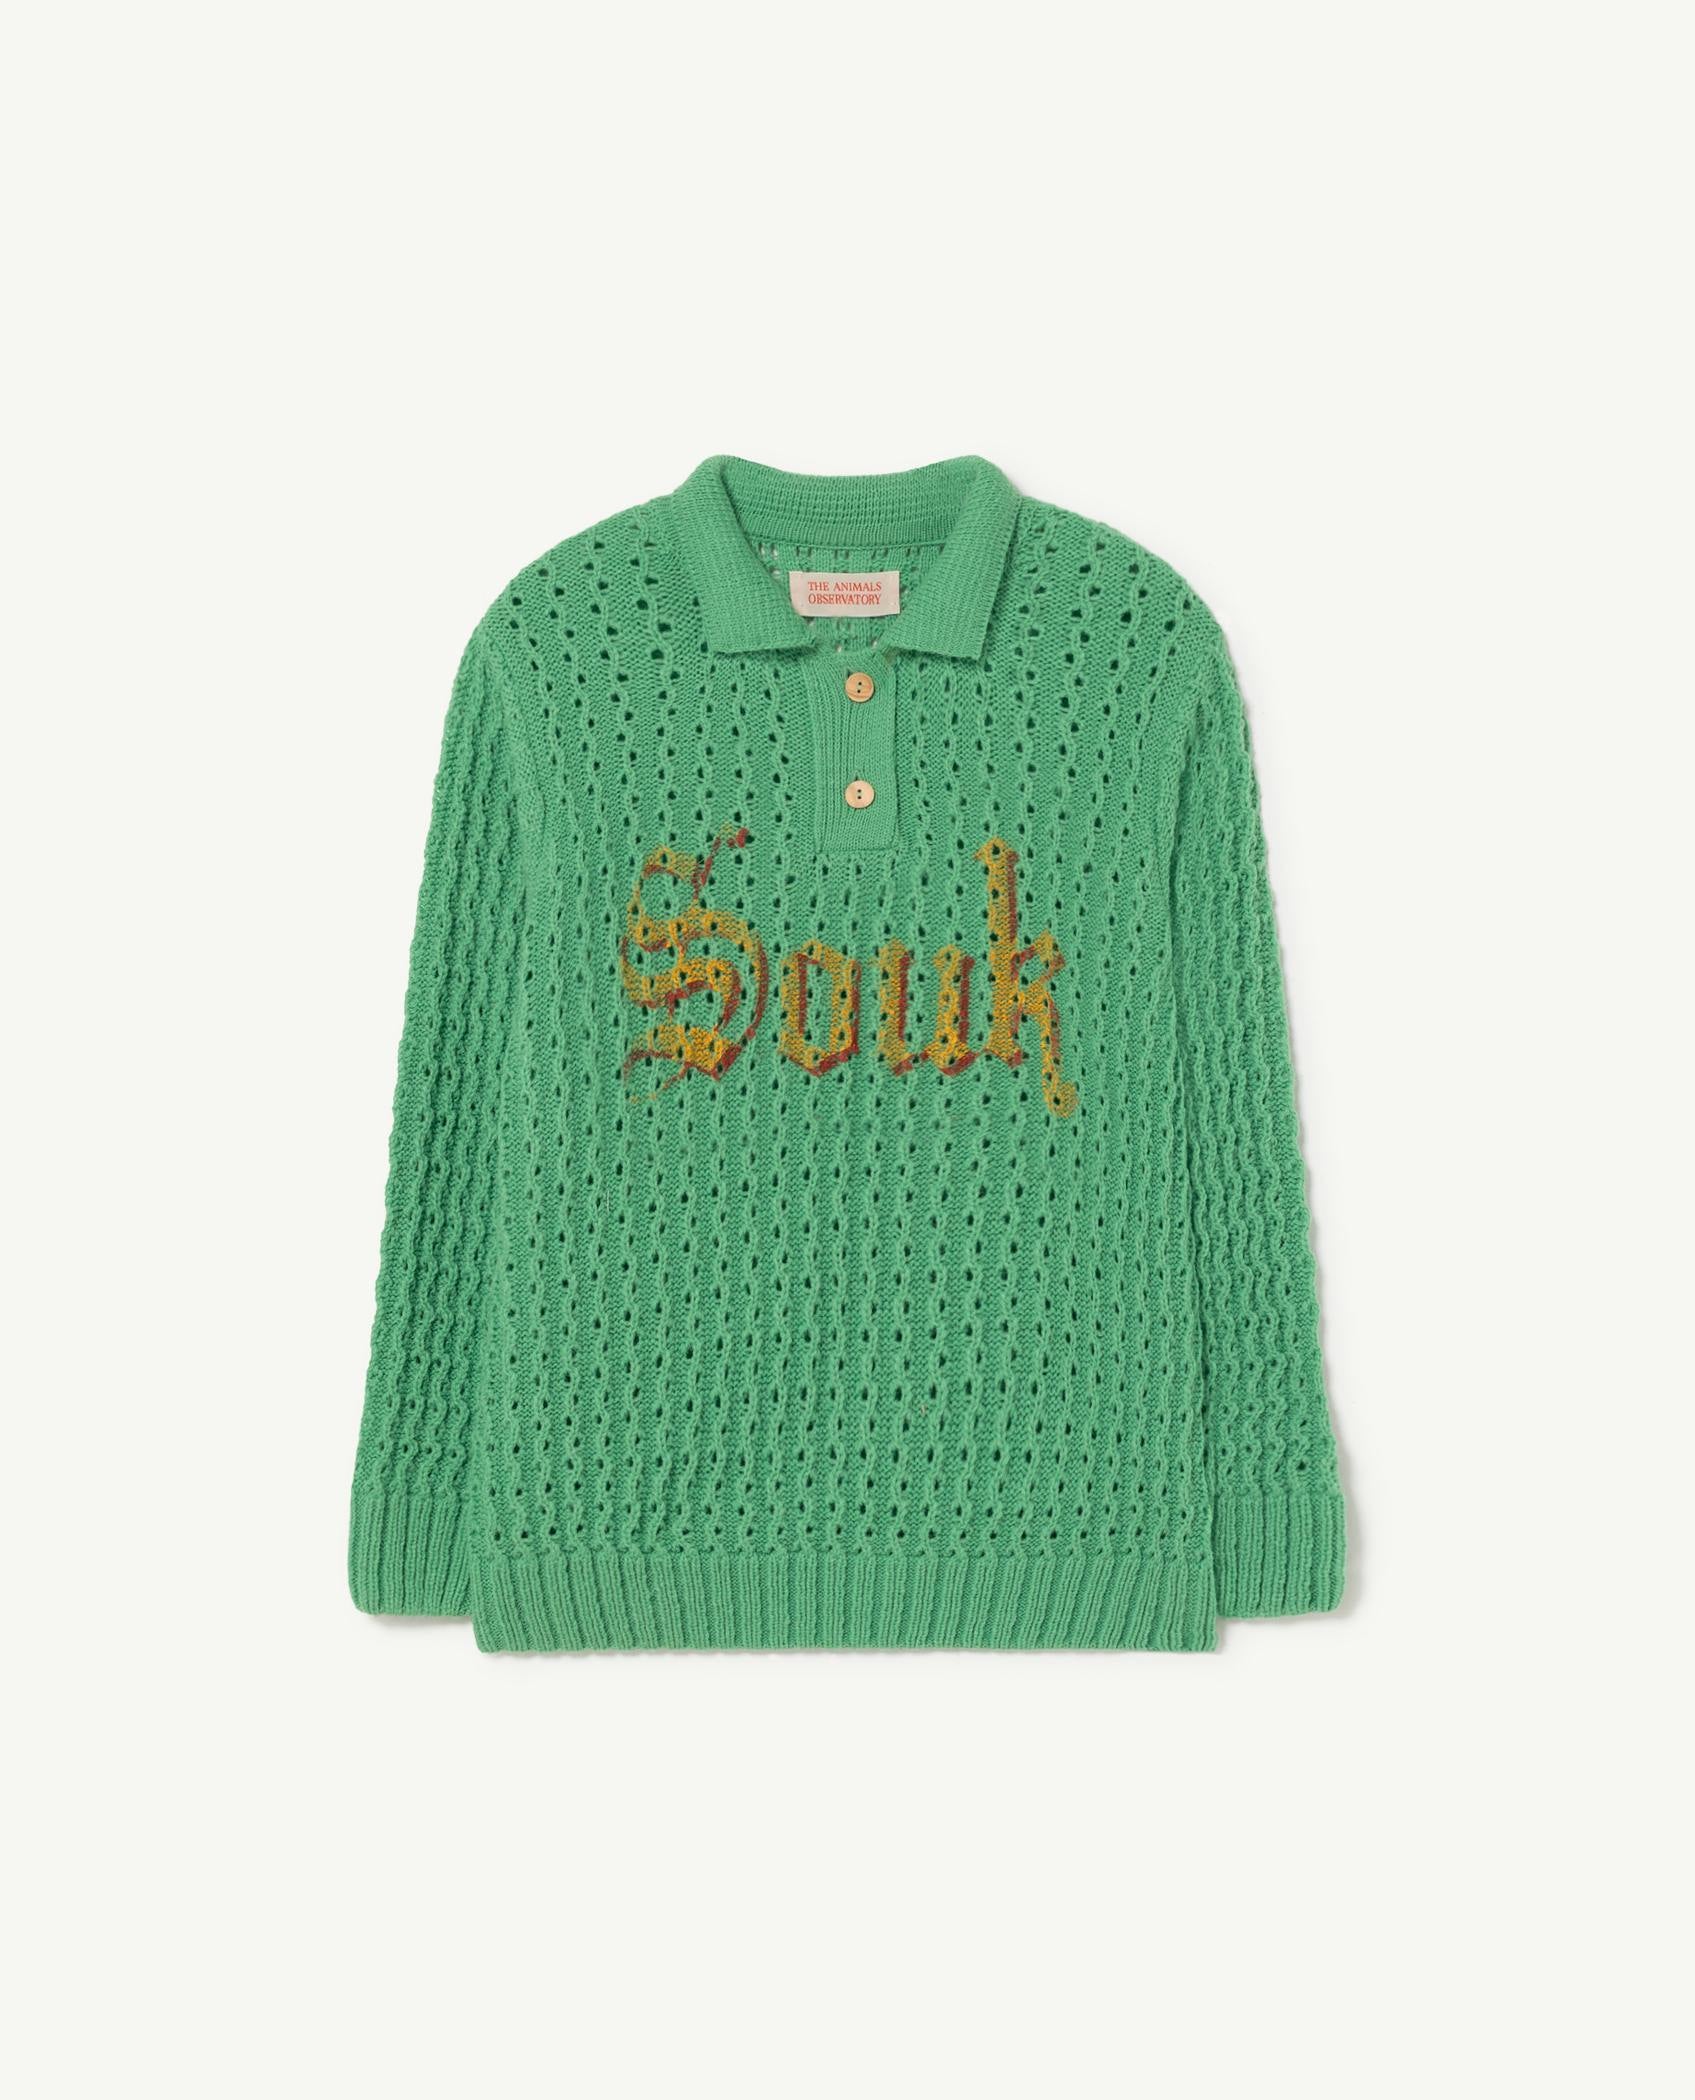 Soft Green Raven Kids Sweater PRODUCT FRONT